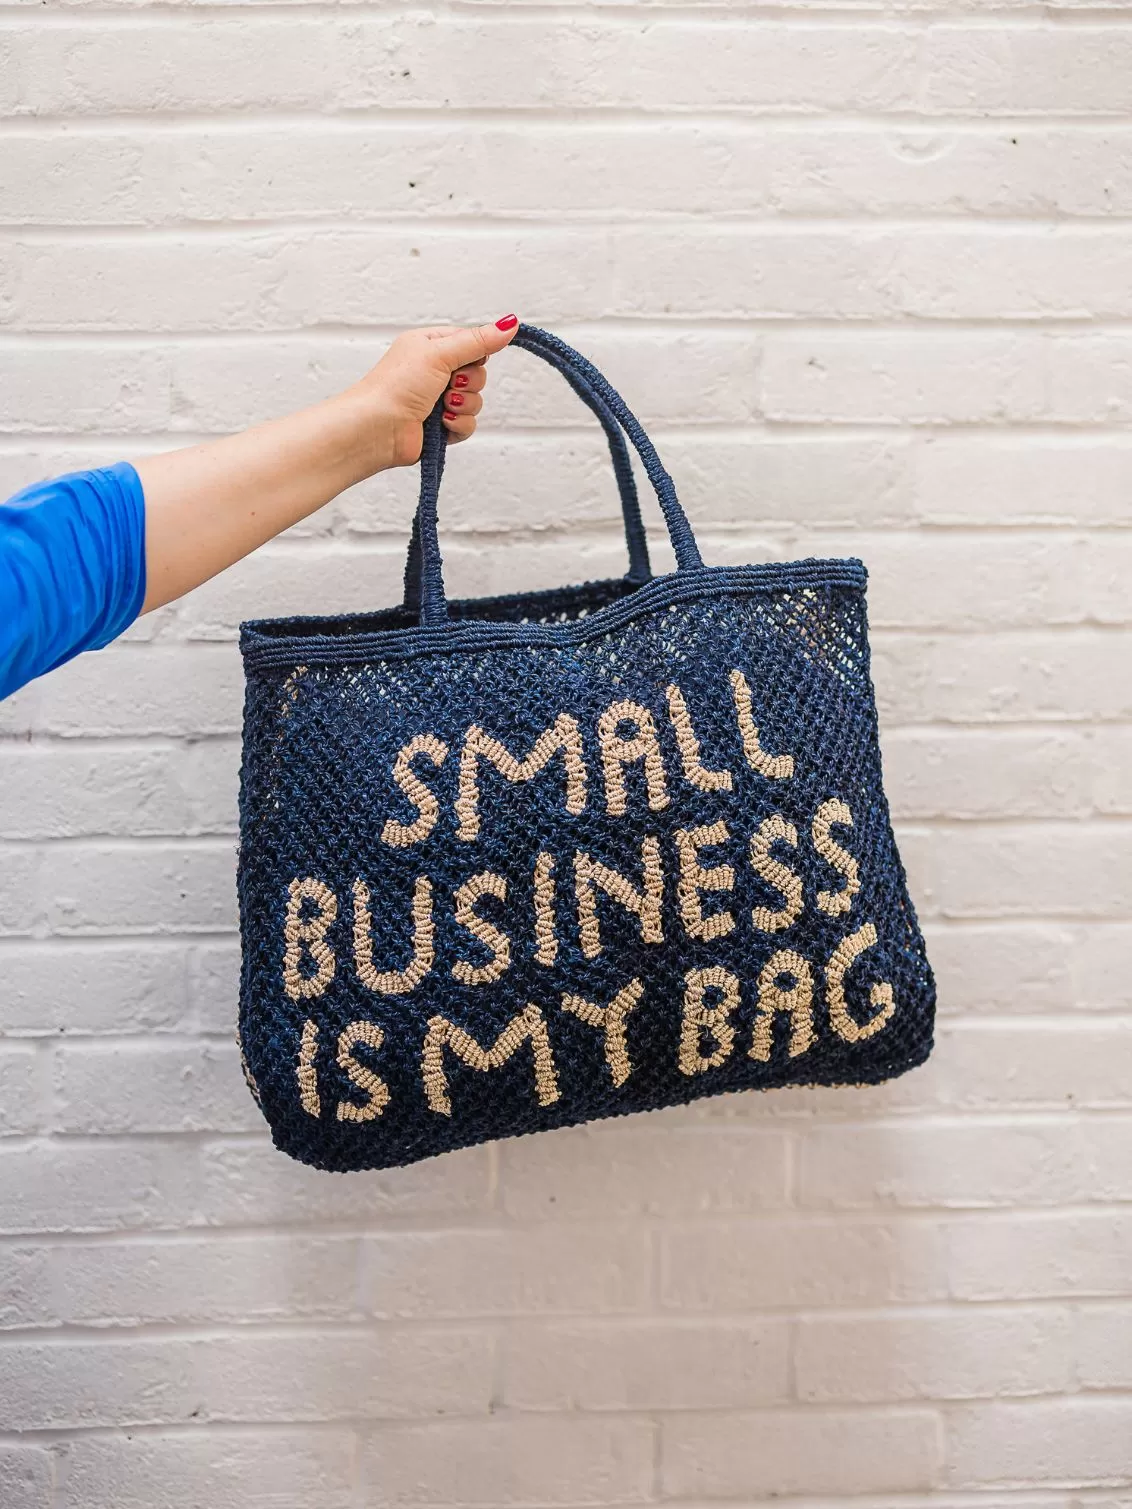 The Jacksons Small Business Is My Bag seen held against a white brick wall.